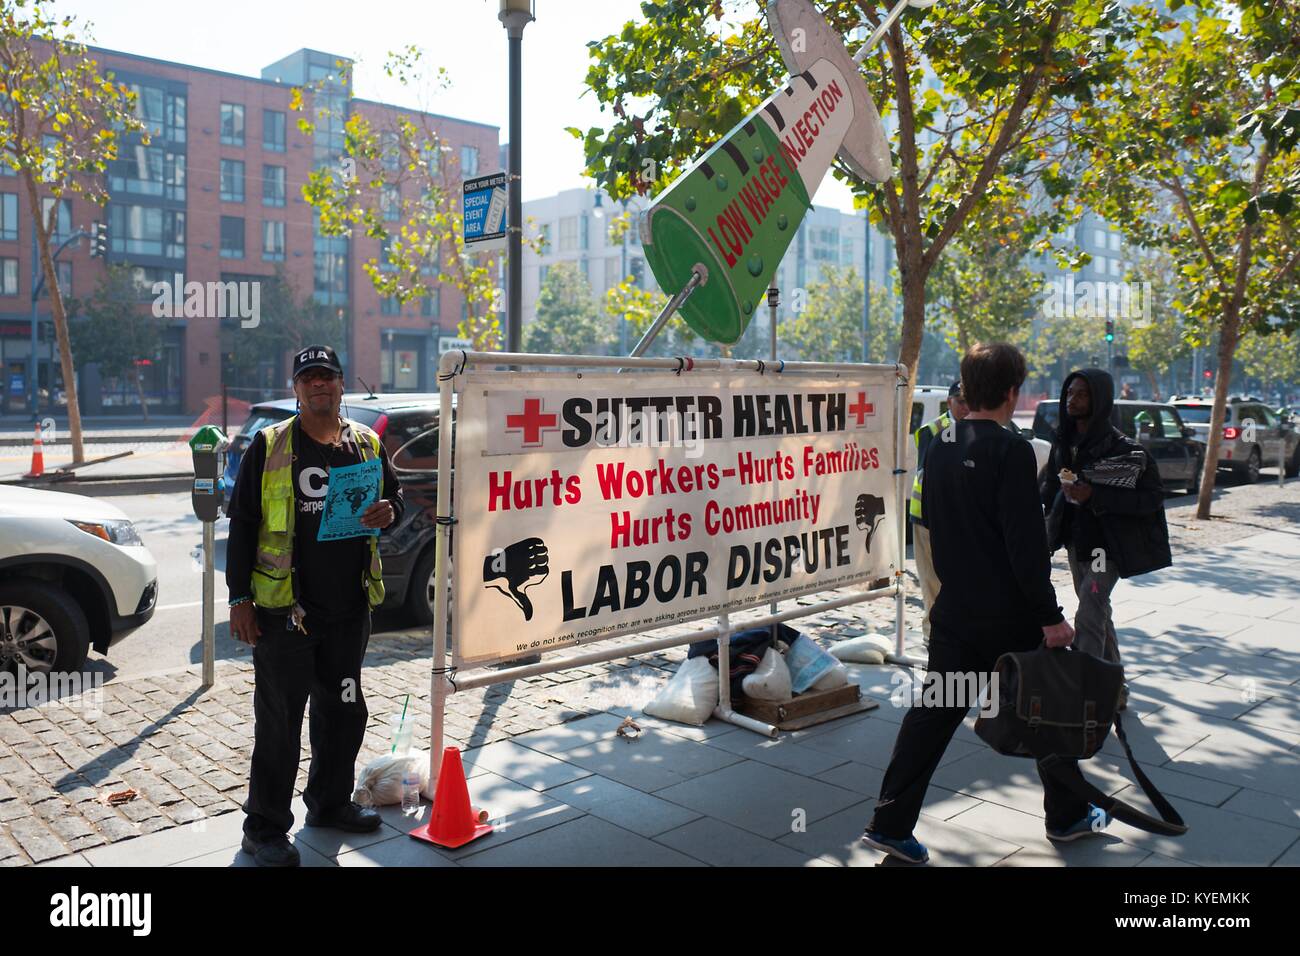 Protesters picket outside an office of Sutter Health during a labor dispute in the South of Market (SoMa) neighborhood of San Francisco, California, October 13, 2017. () Stock Photo